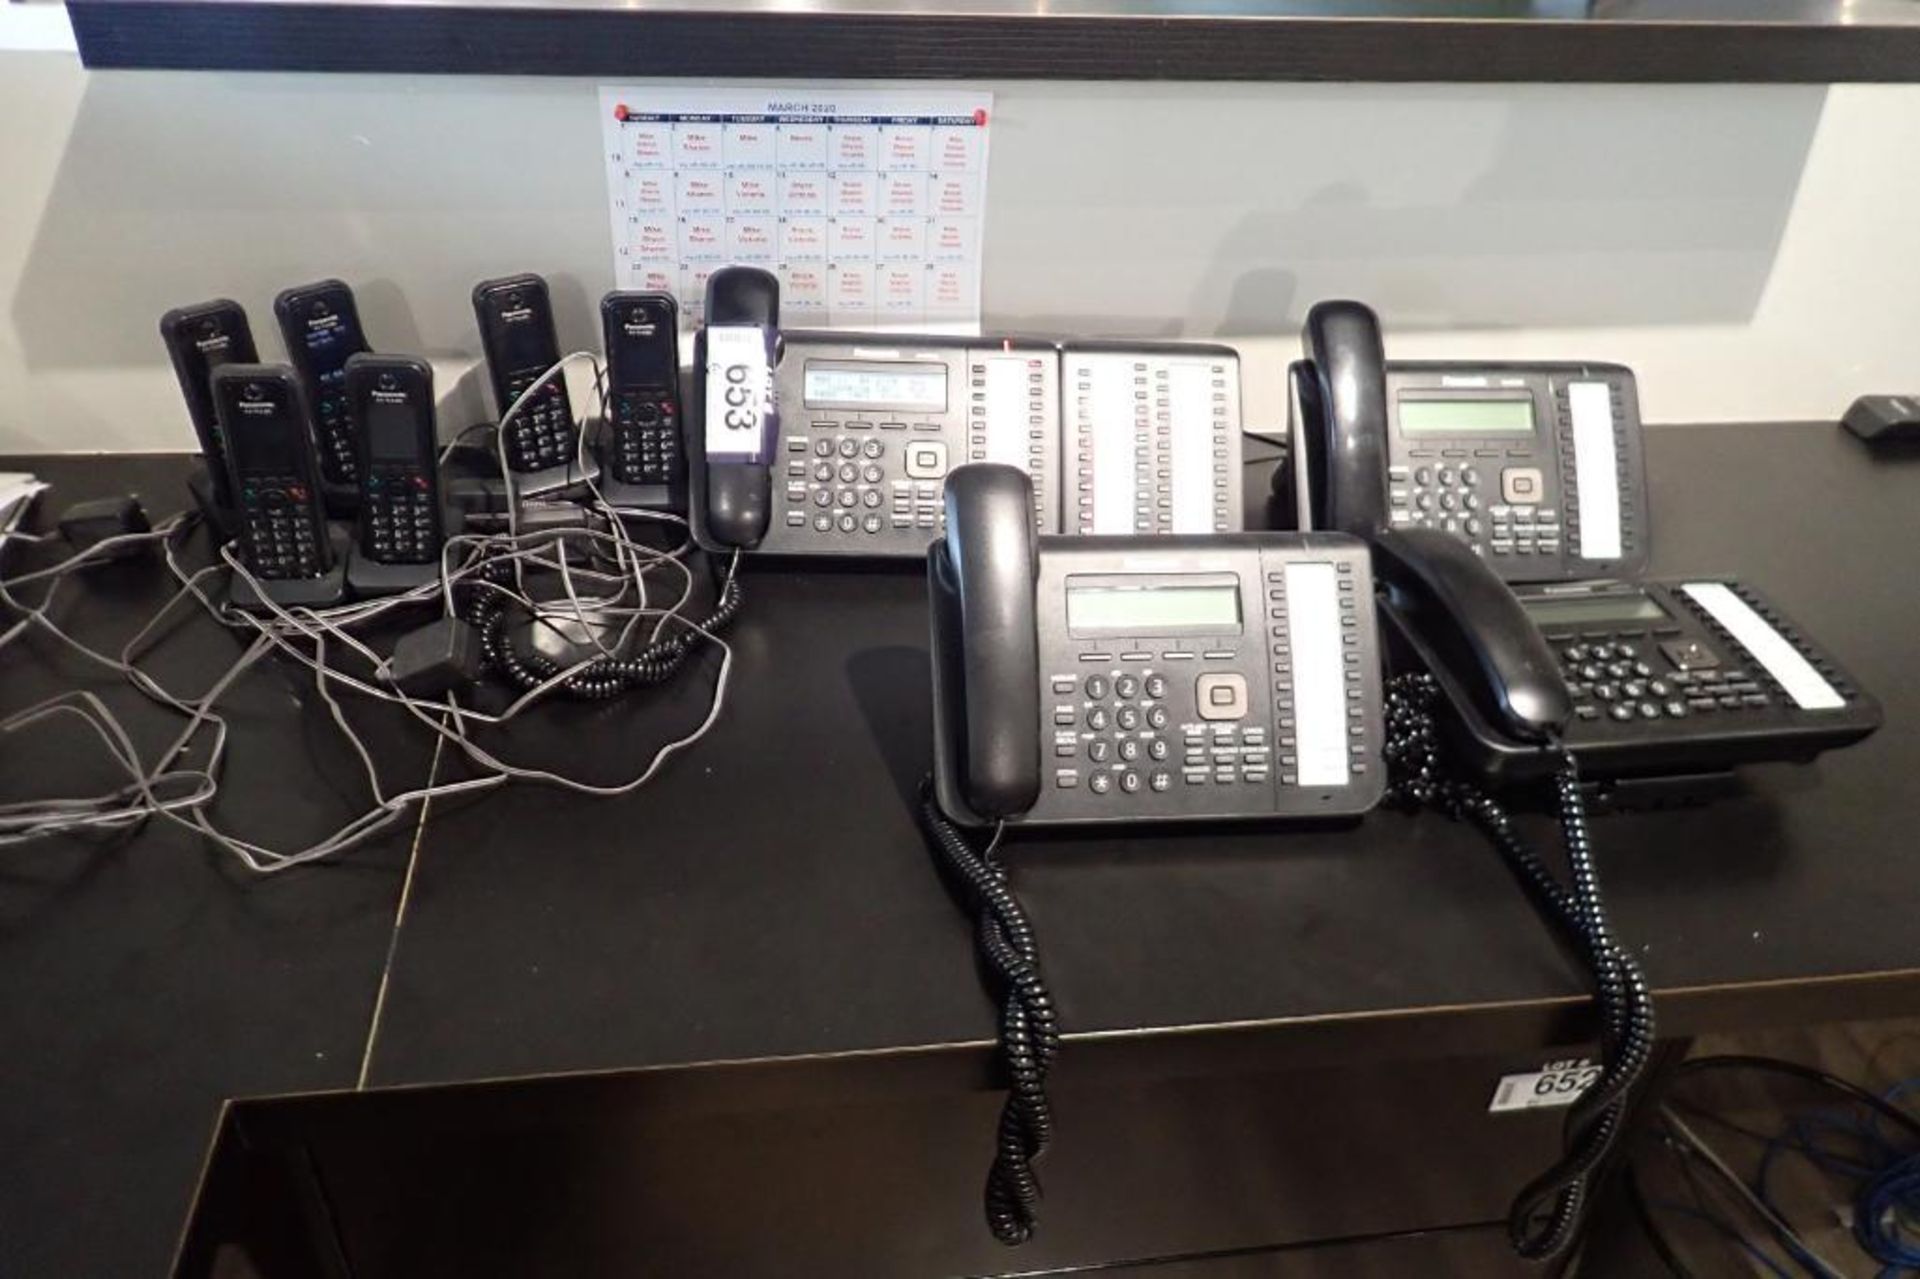 Lot of Panasonic DT543 Phone System w/ Reception Handset, 7 Cordless Handsets and 3 Handsets- USED.